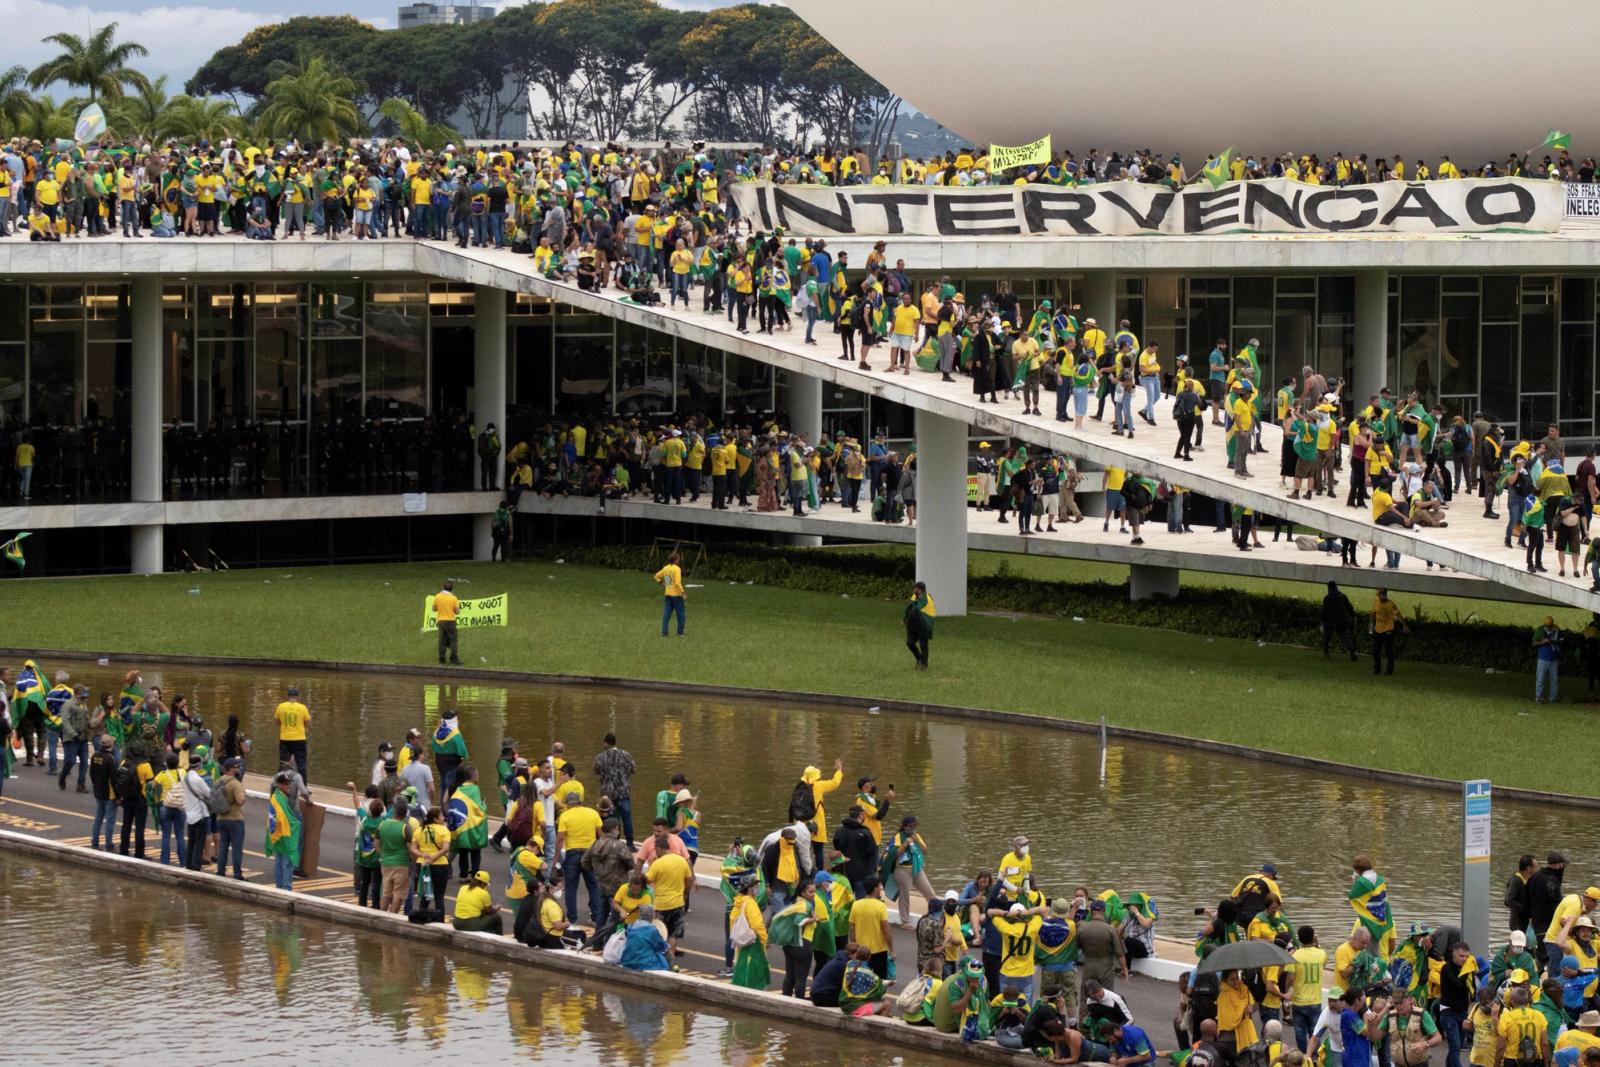 Supporters of Brazil's far-right former President Jair Bolsonaro who dispute the election of leftist President Luiz Inacio Lula da Silva gather at Planalto Palace after invading the building as well as the Congress and Supreme Court, in Brasilia, Brazil January 8, 2023.